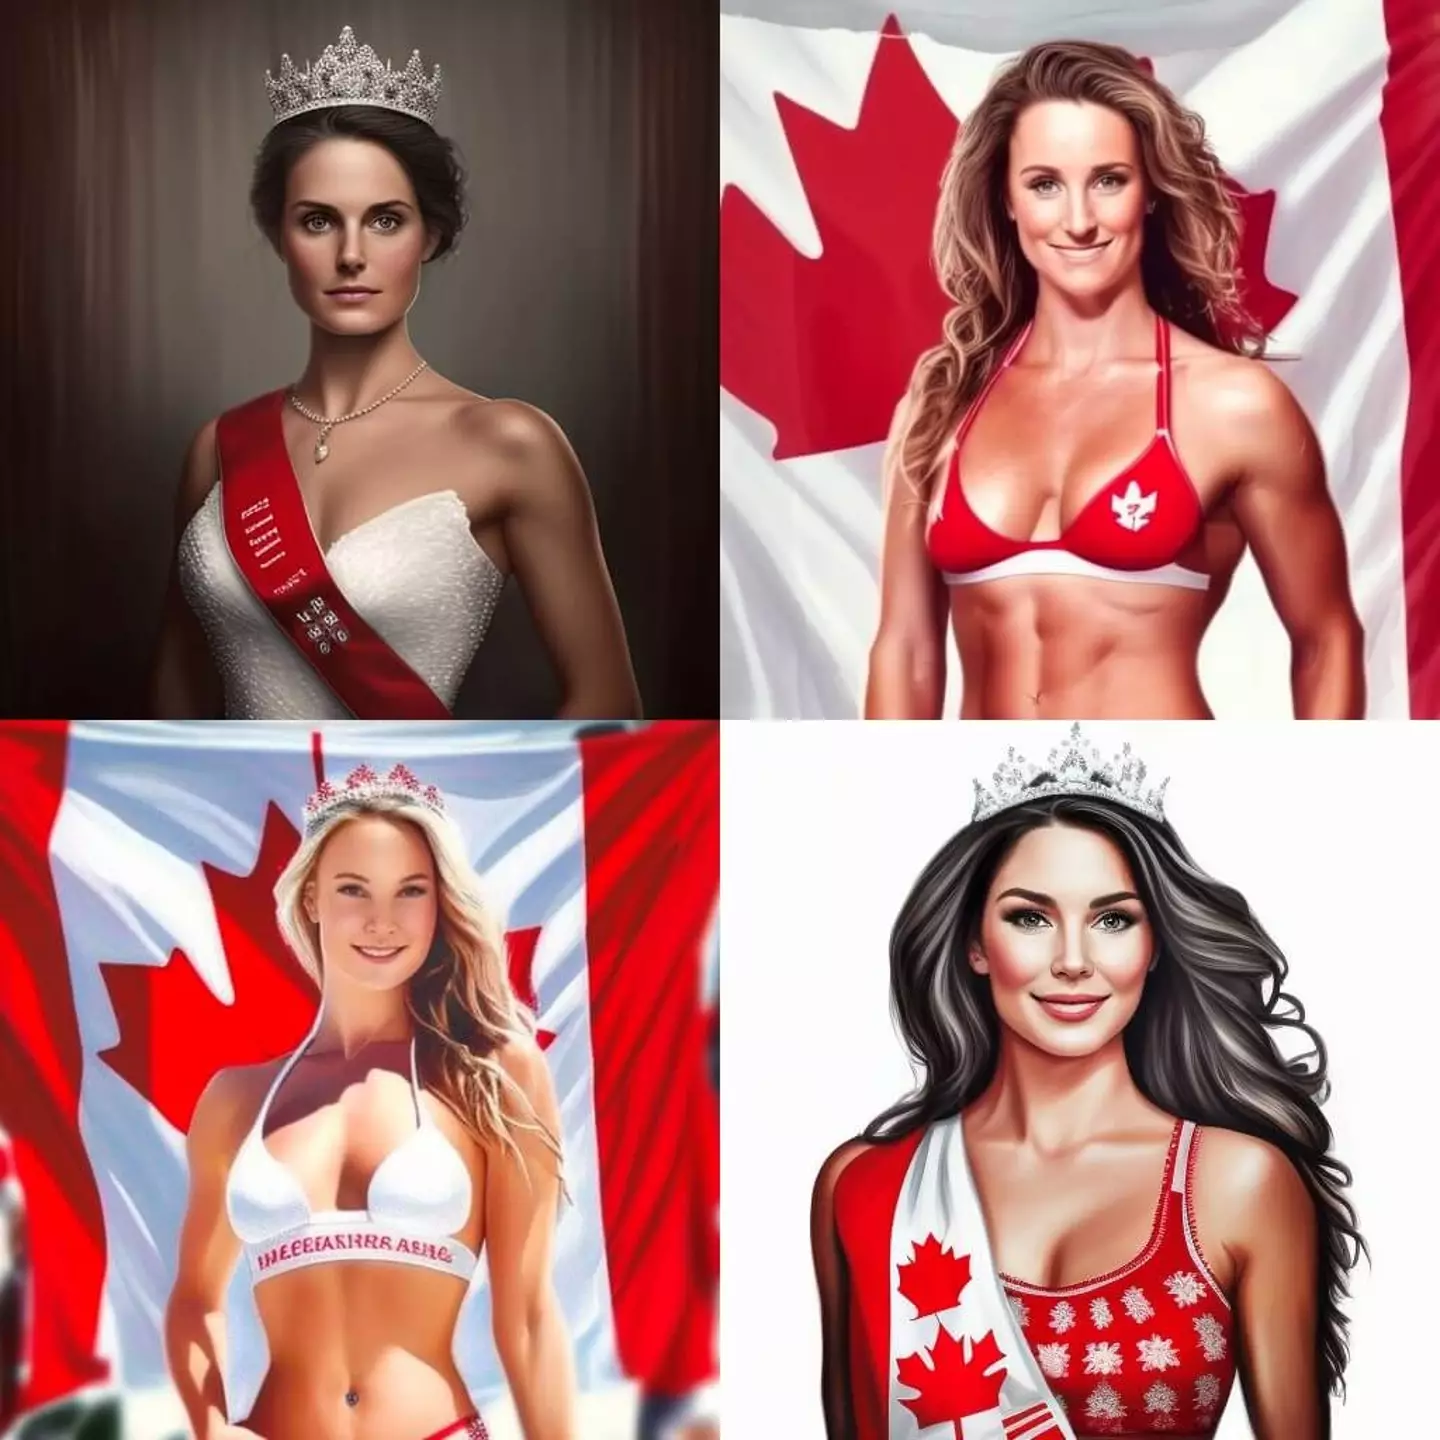 The 'ideal' Canadian woman must be cold.